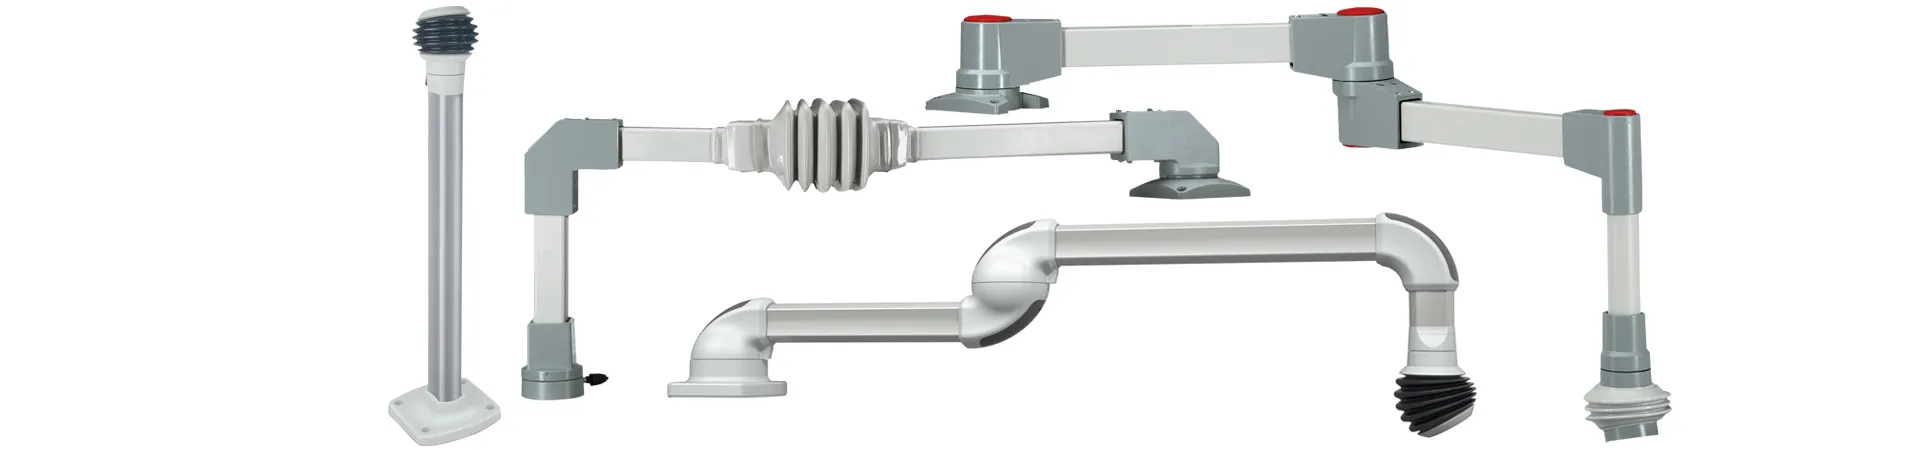 Suspension Arm Systems